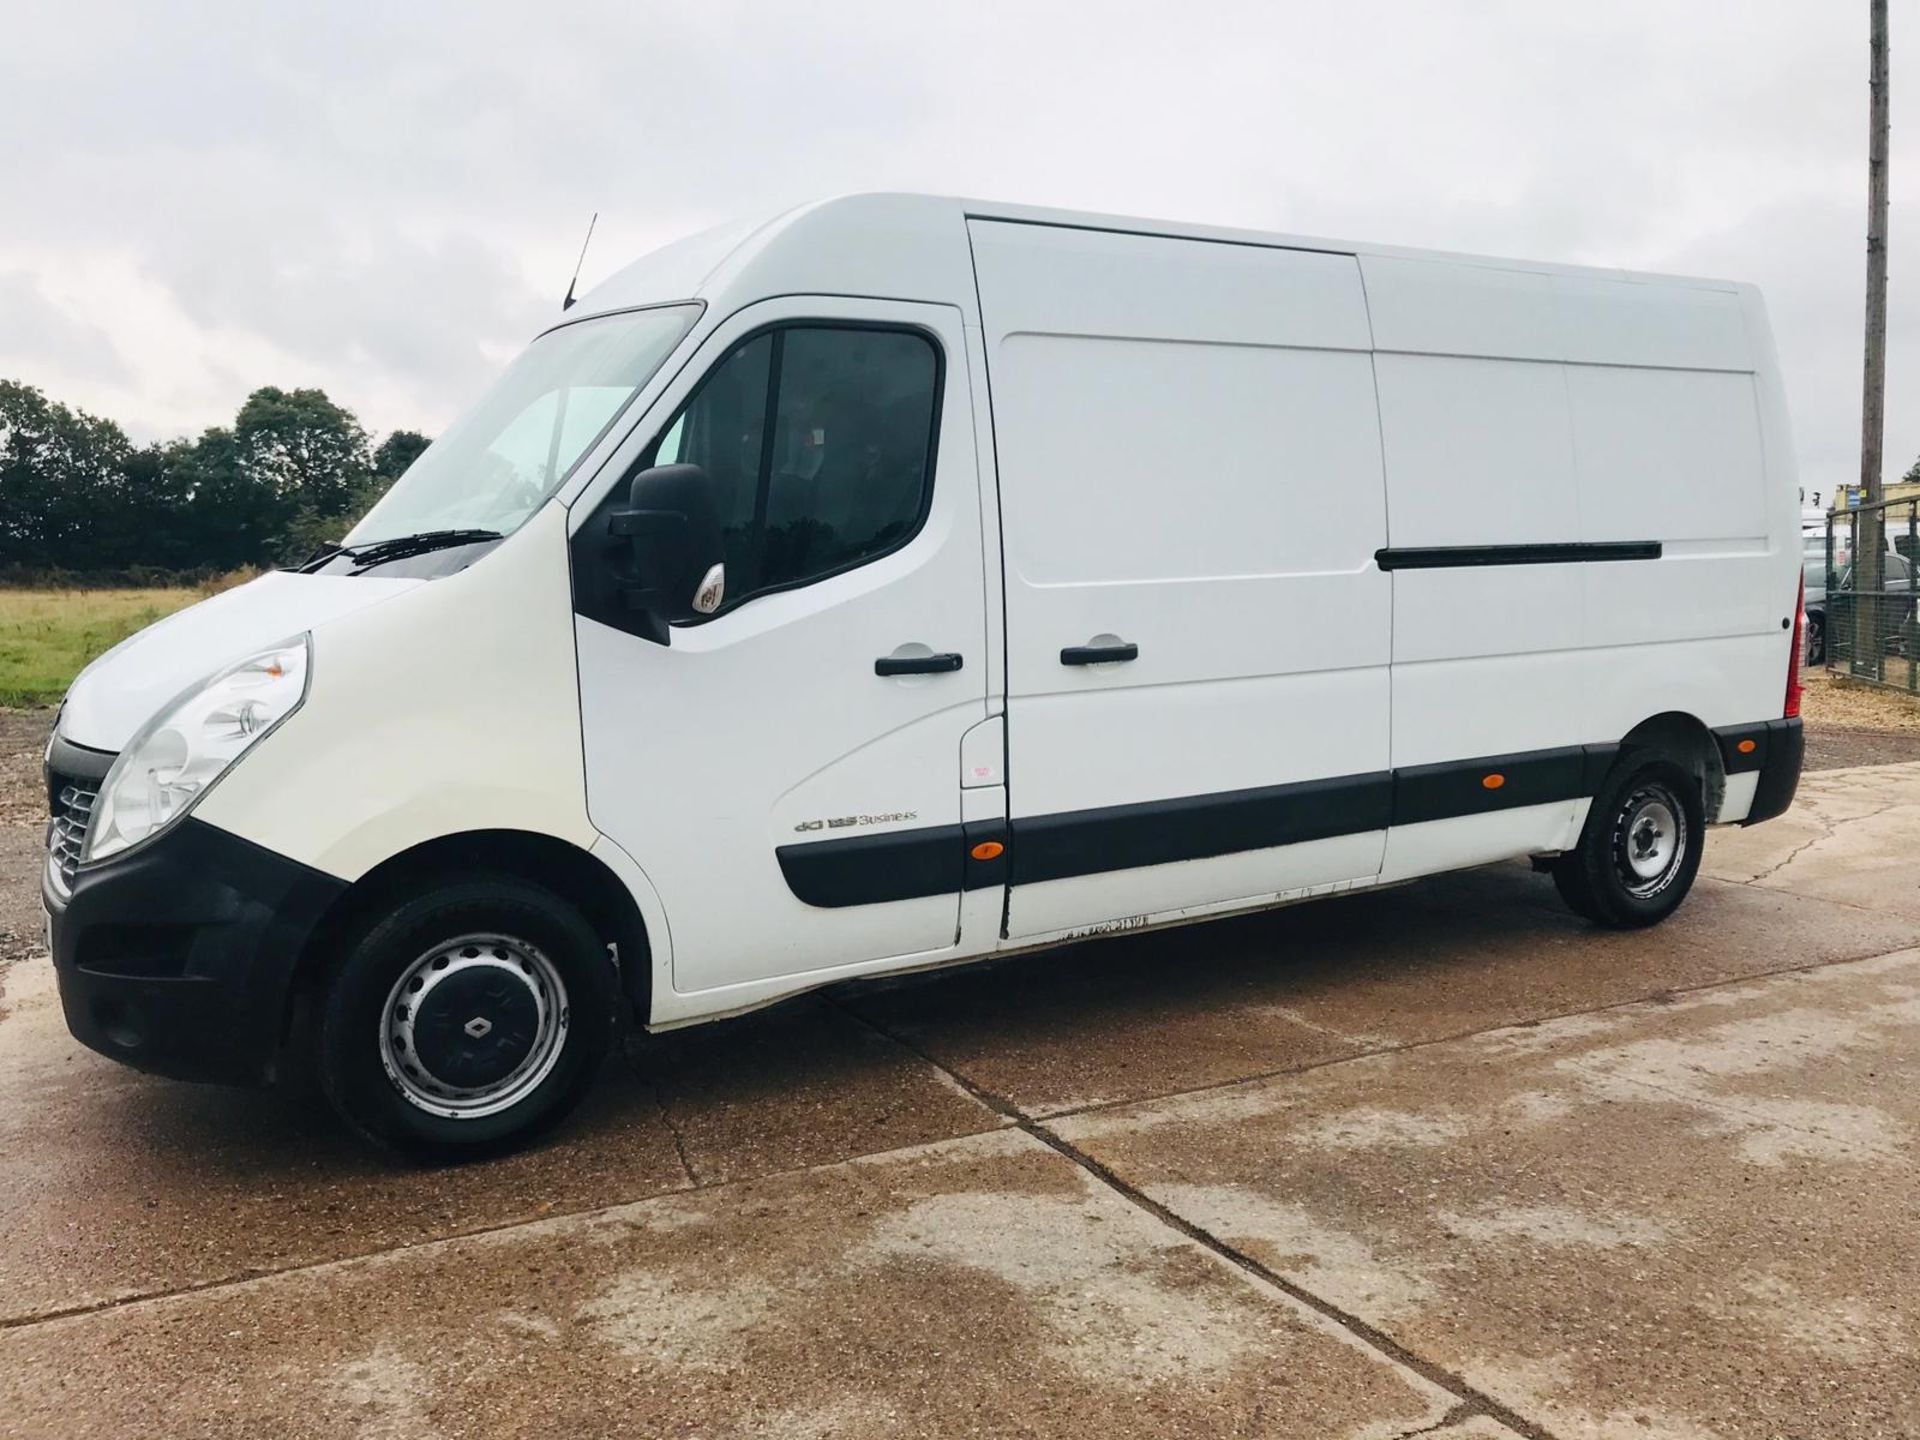 On Sale RENAULT MASTER *BUSINESS EDITION* LWB HI-ROOF (2015 MODEL) '2.3 DCI - 125 BHP - 6 SPEED' - Image 2 of 19